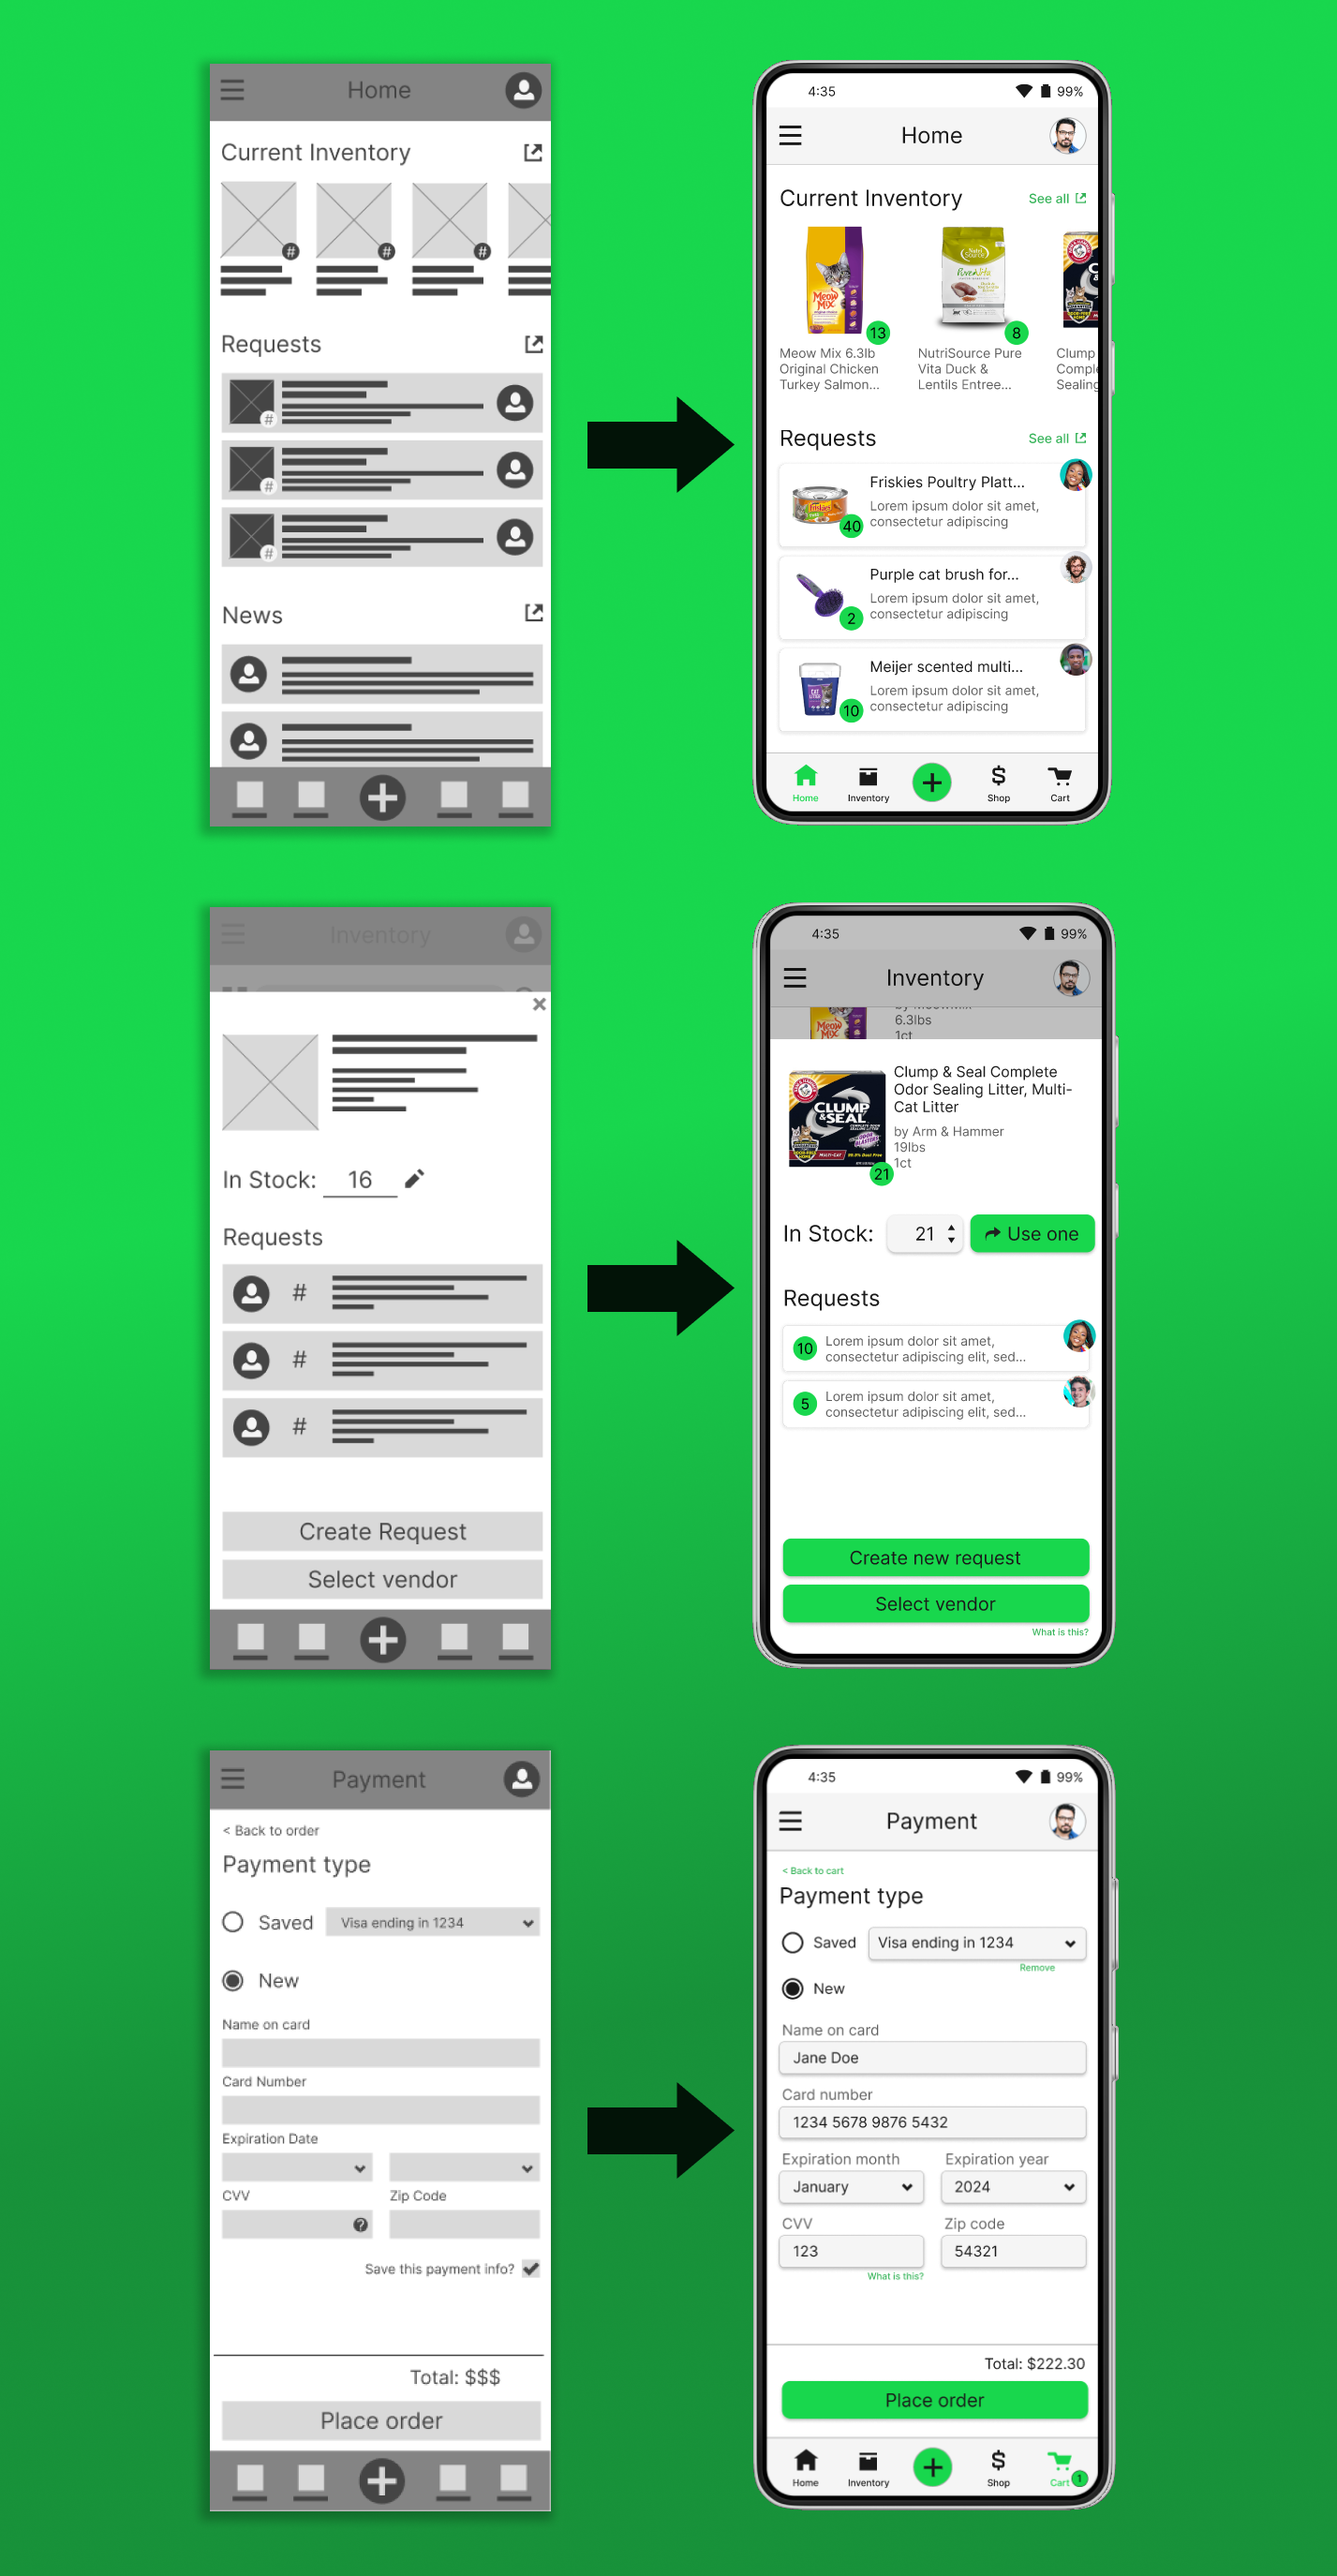 A stylized screen shot of low fidelity digital wireframes on the left and high fidelity digital mockups on the right. Three frames are shown for each: the home screen, the item screen, and the purchasing screen. 3 arrows separate each pair, pointing to the right, indicating the change from the earlier state to the high fidelity mockups.